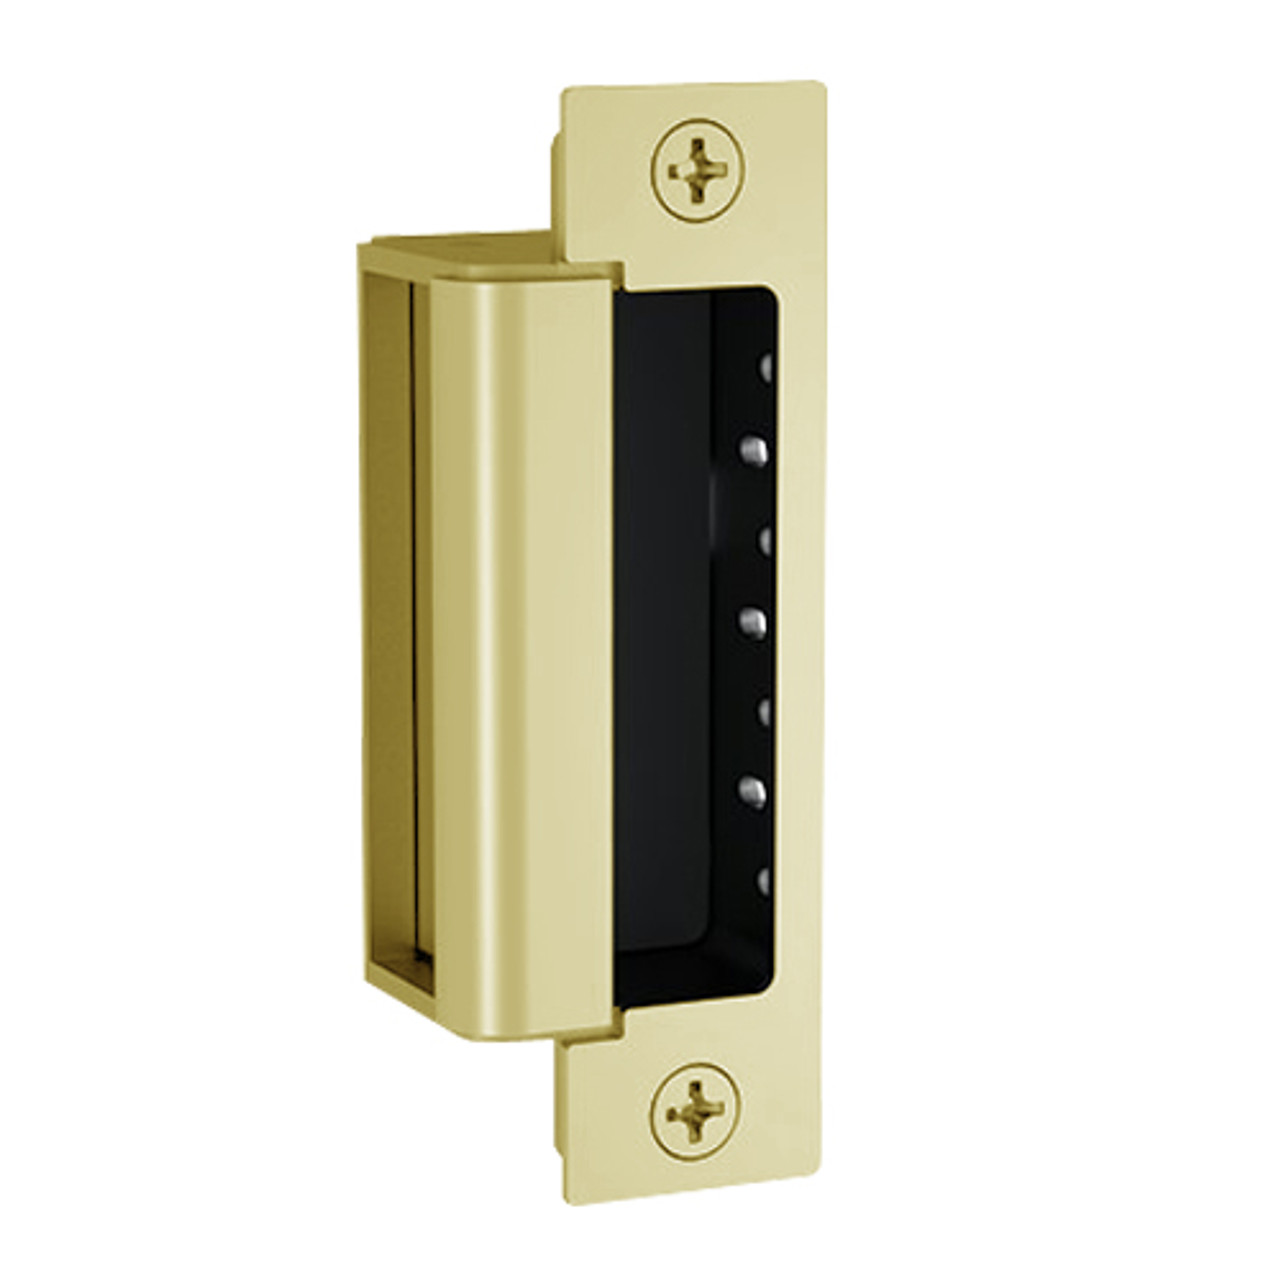 1600-LM-606 Hes 1600 Series Dynamic Low Profile Electric Strike Bodies with Lock Monitor in Satin Brass